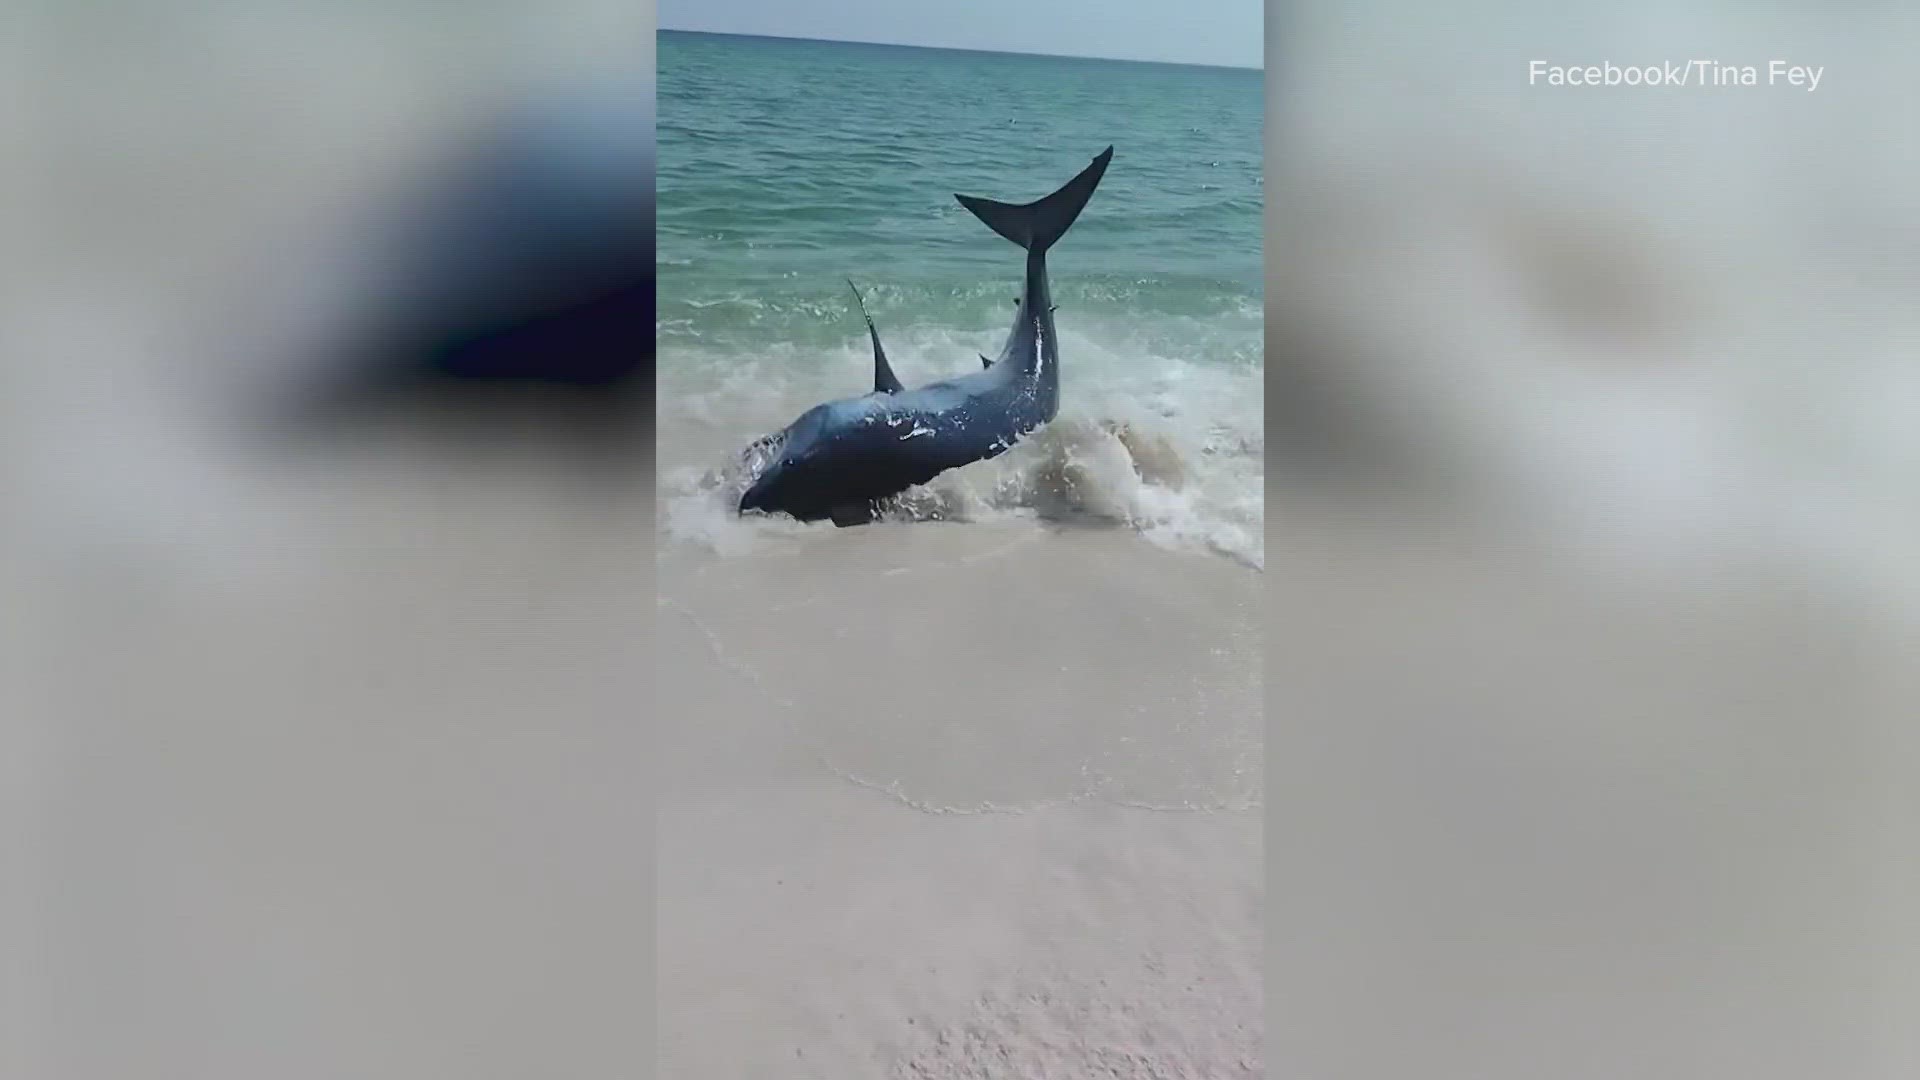 The mako shark was stuck onshore, so people helped it get back into deeper water.